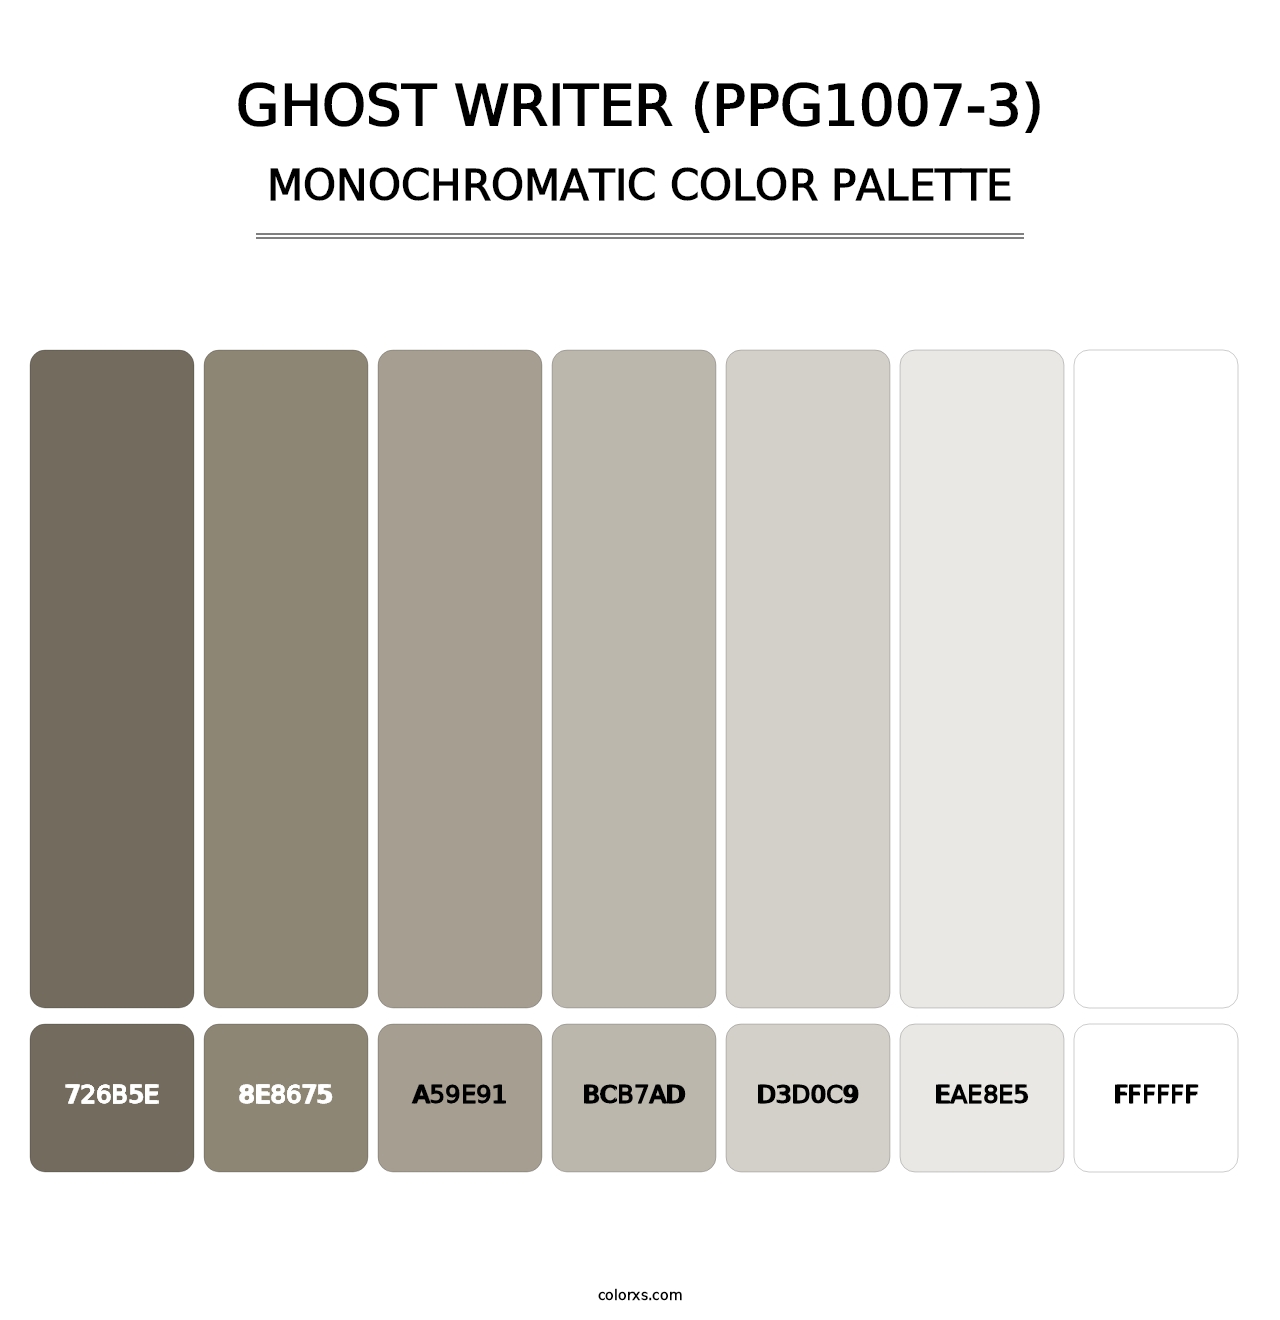 Ghost Writer (PPG1007-3) - Monochromatic Color Palette